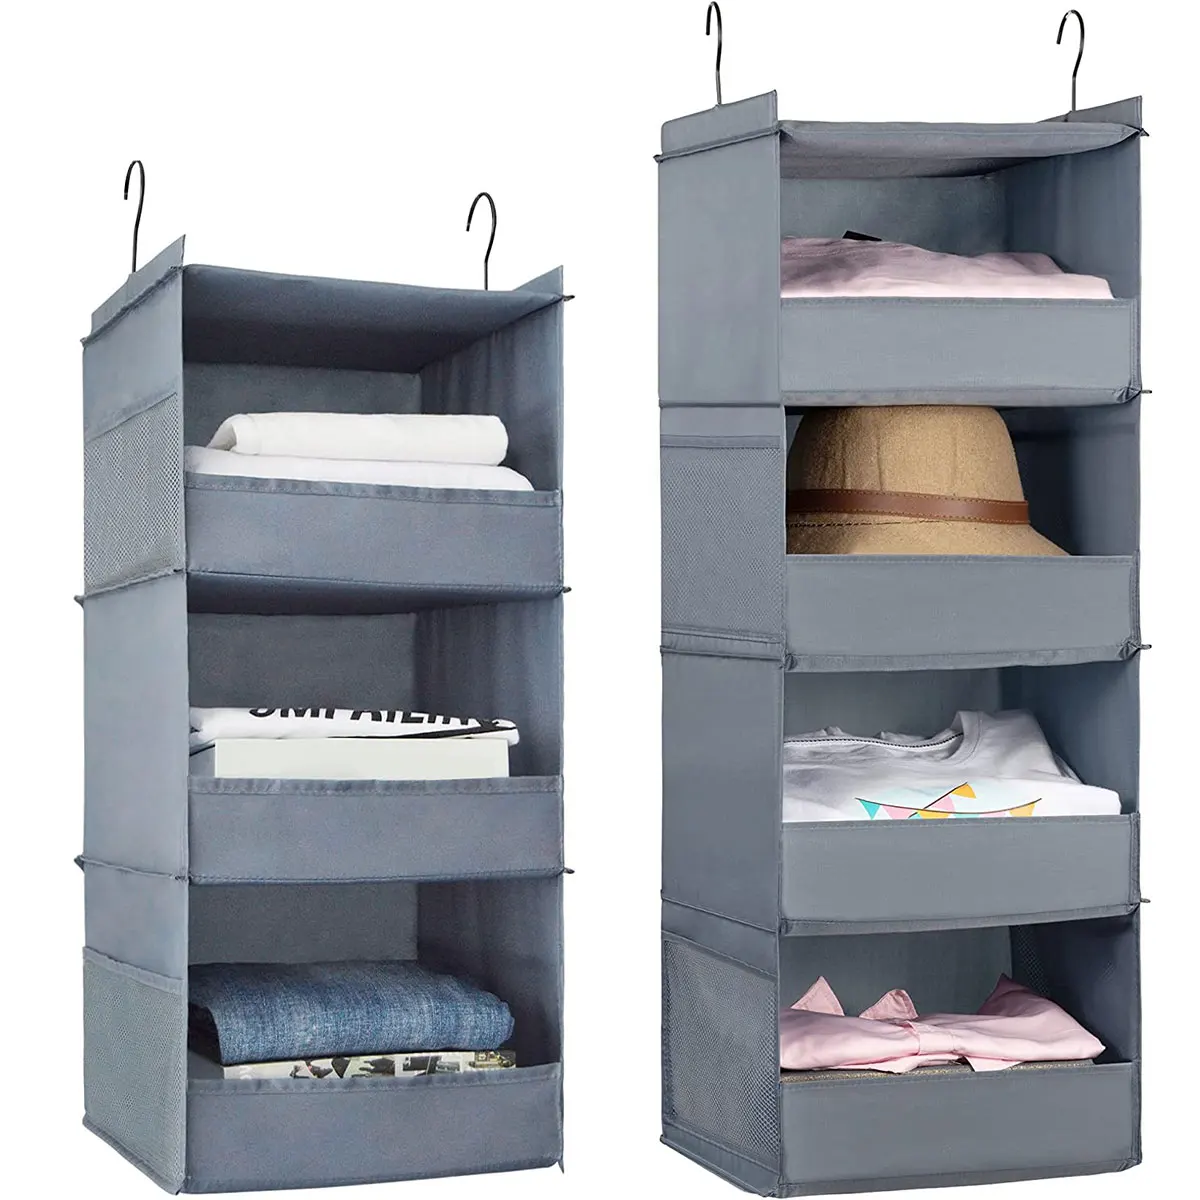 

3/4 Tier Hanging Wardrobe Organizer Collapsible Closet Hanging Shelves with Side Pocket Sturdy Durable Hanging Closet Organizers